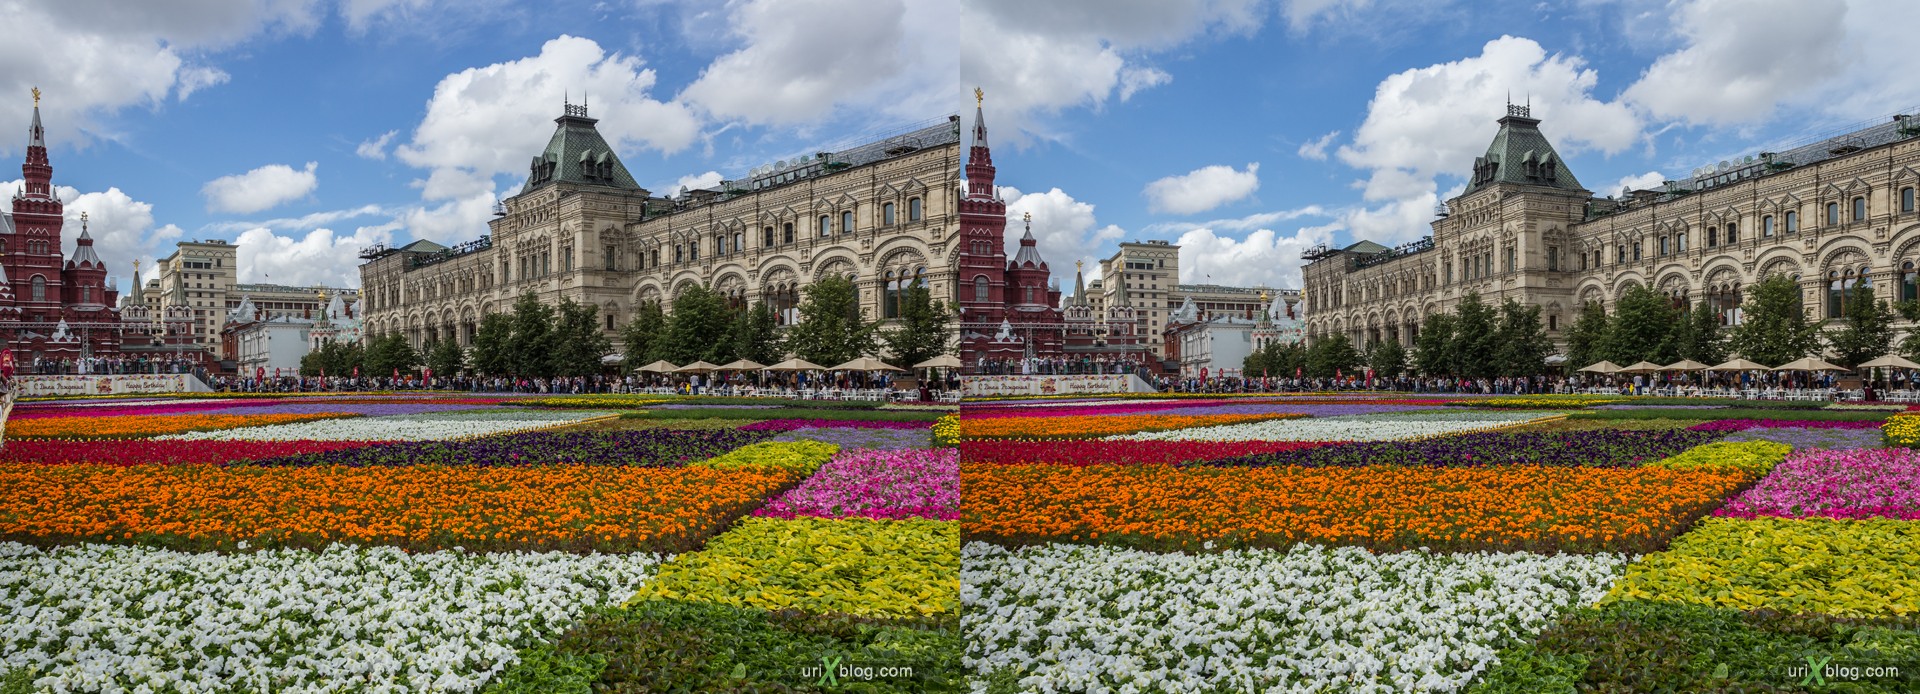 2013, Red Square, Moscow, Russia, Flowers, 3D, stereo pair, cross-eyed, crossview, cross view stereo pair, stereoscopic